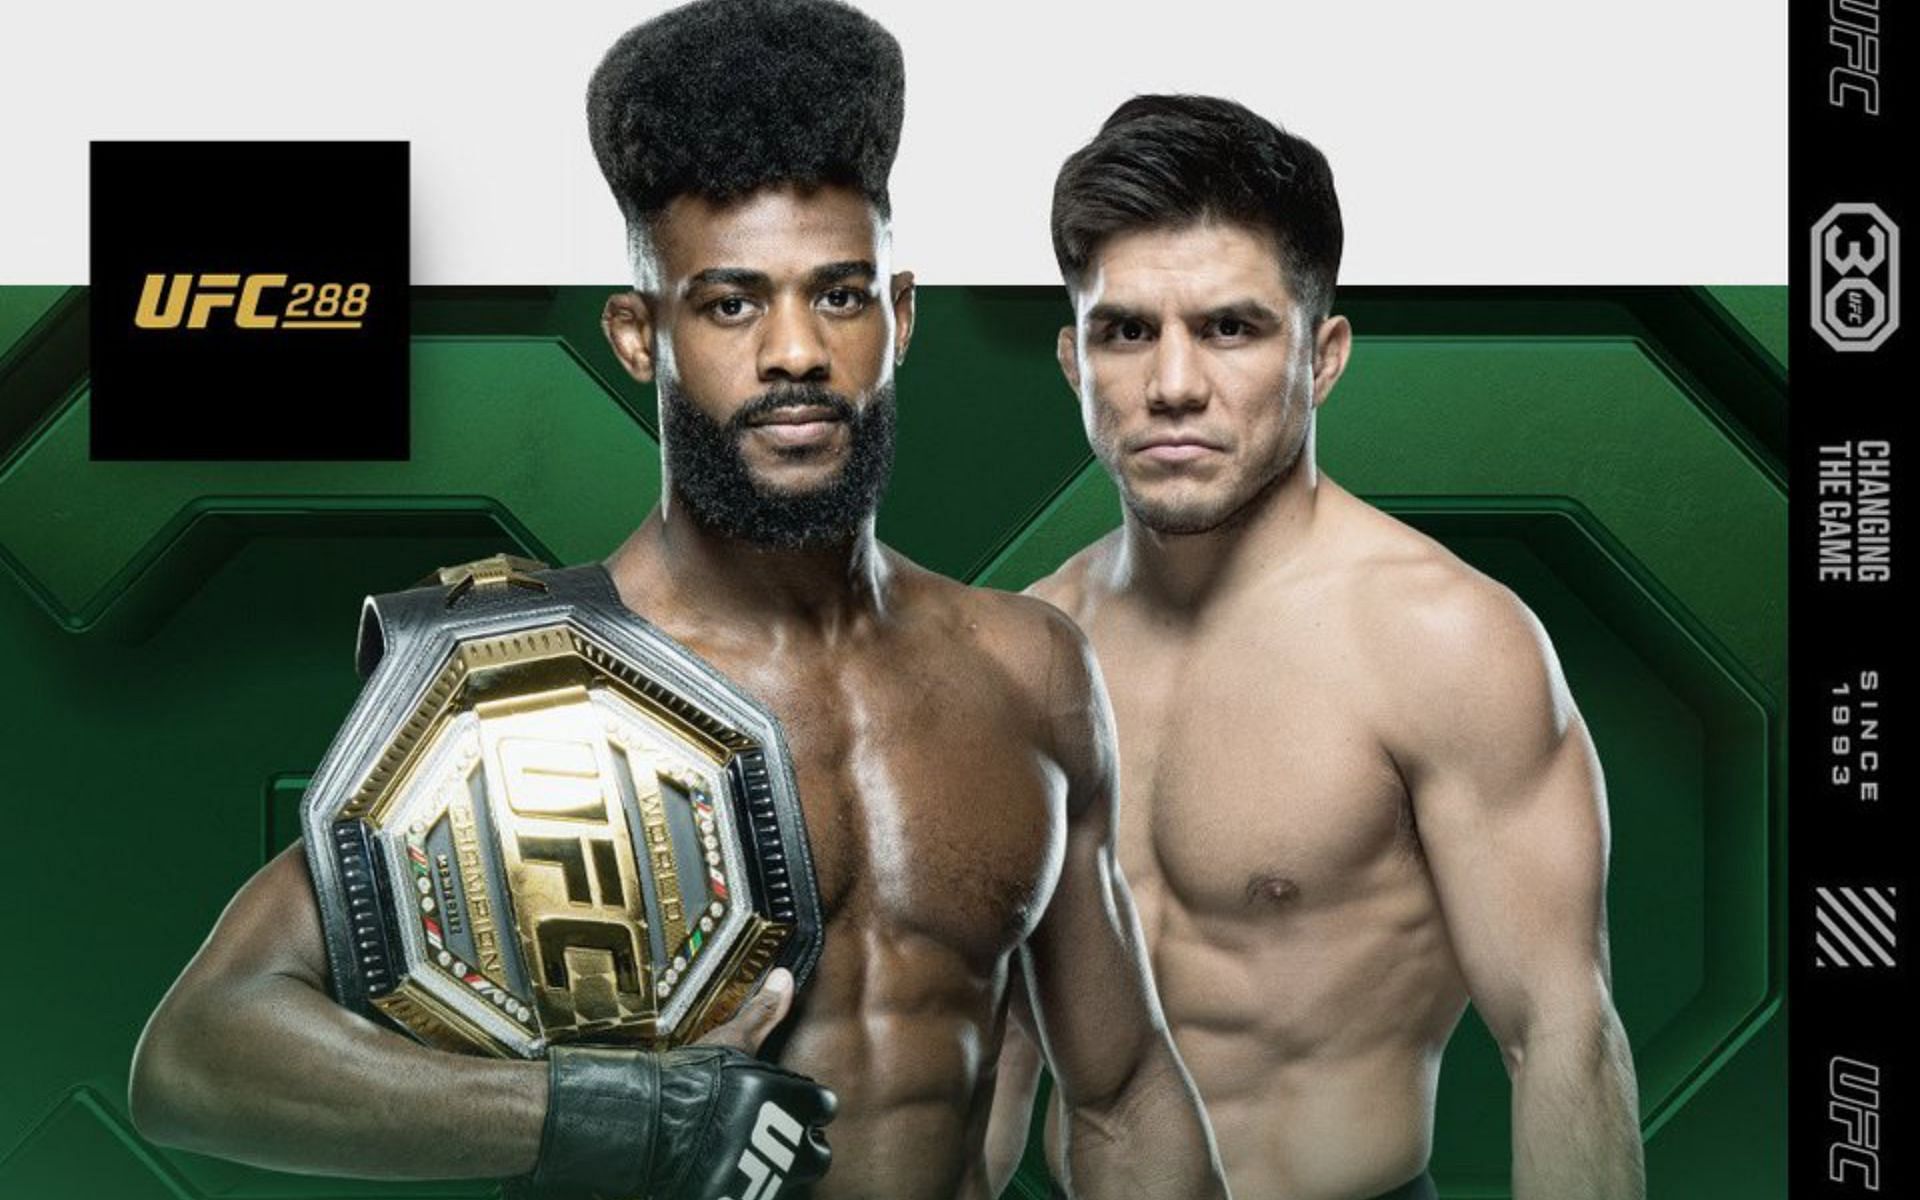 When Is UFC 288 Sterling vs Cejudo: Start Time, Date, Venue, Tickets, Fight Card, Where to Watch and More